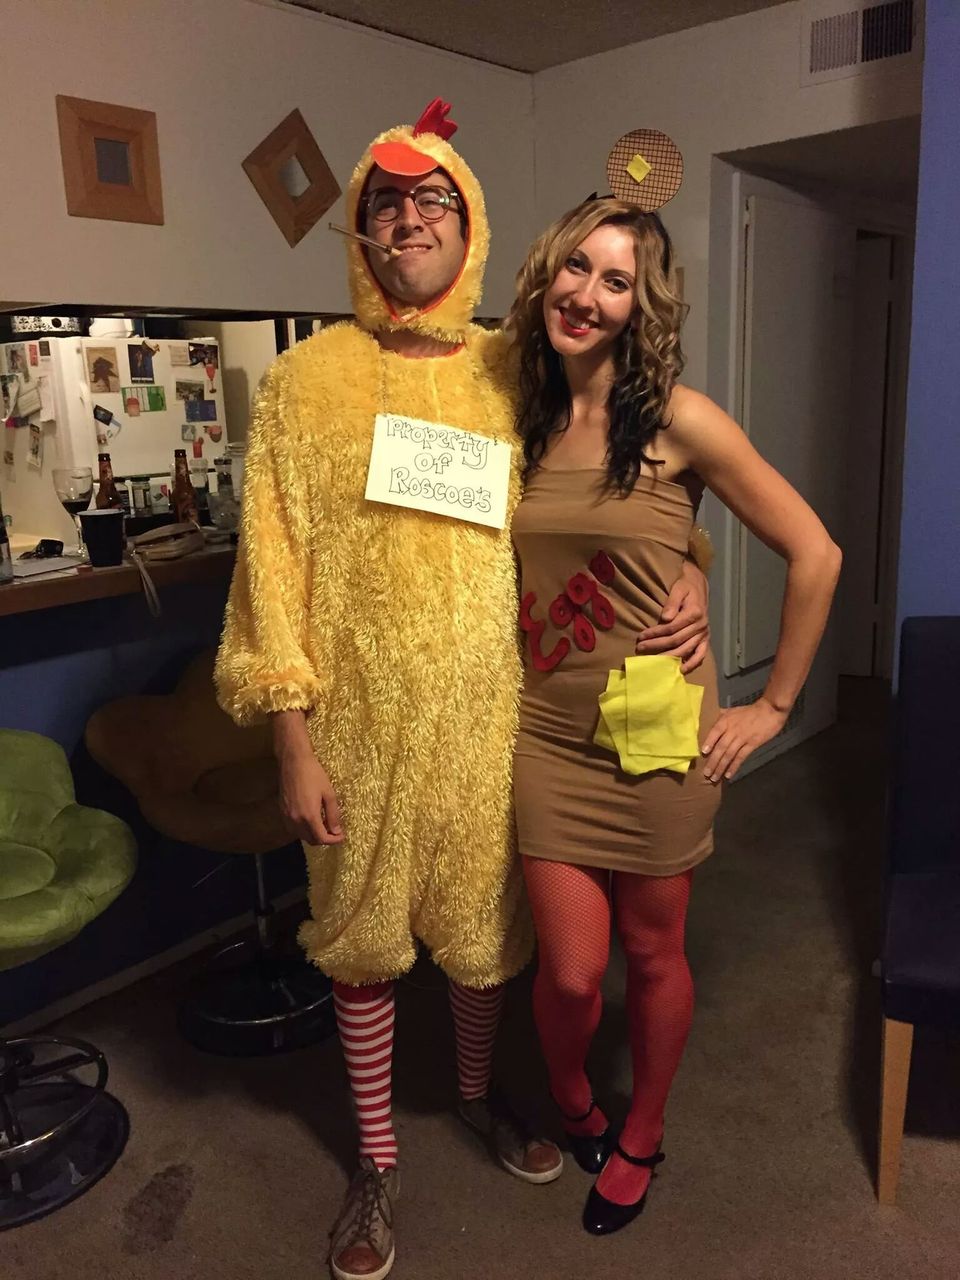 The Best Halloween Costumes Of 2014, According To Us | HuffPost ...